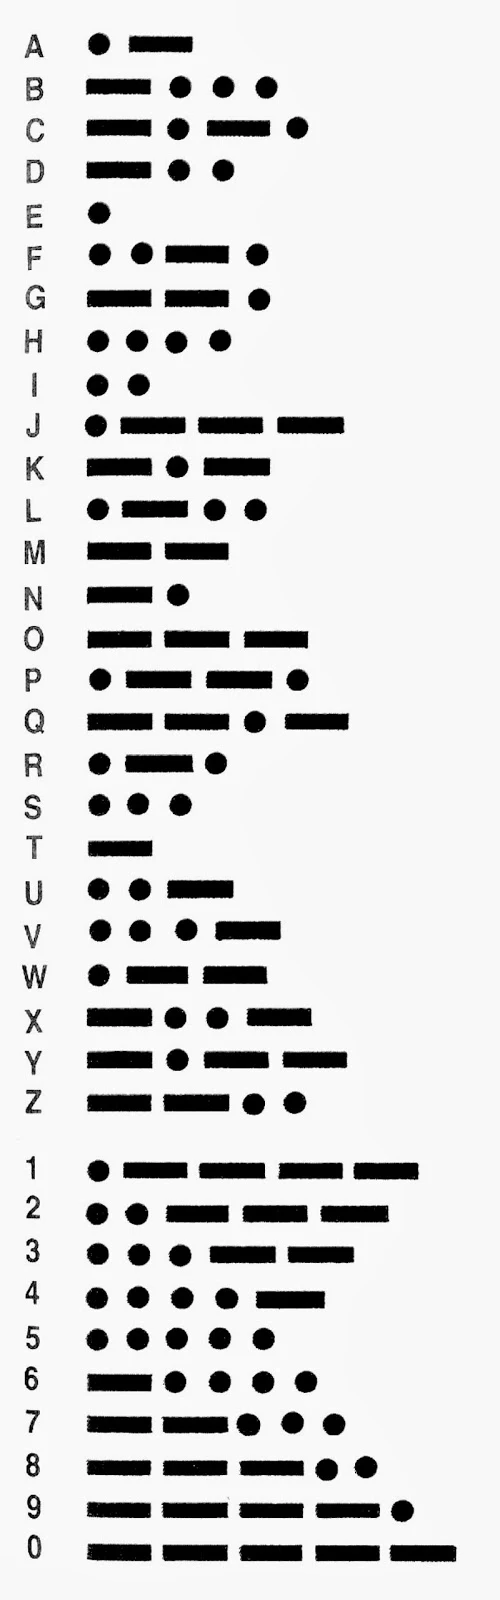 Morse Code for Kids Electric Telegraph and Morse Code Alphabet